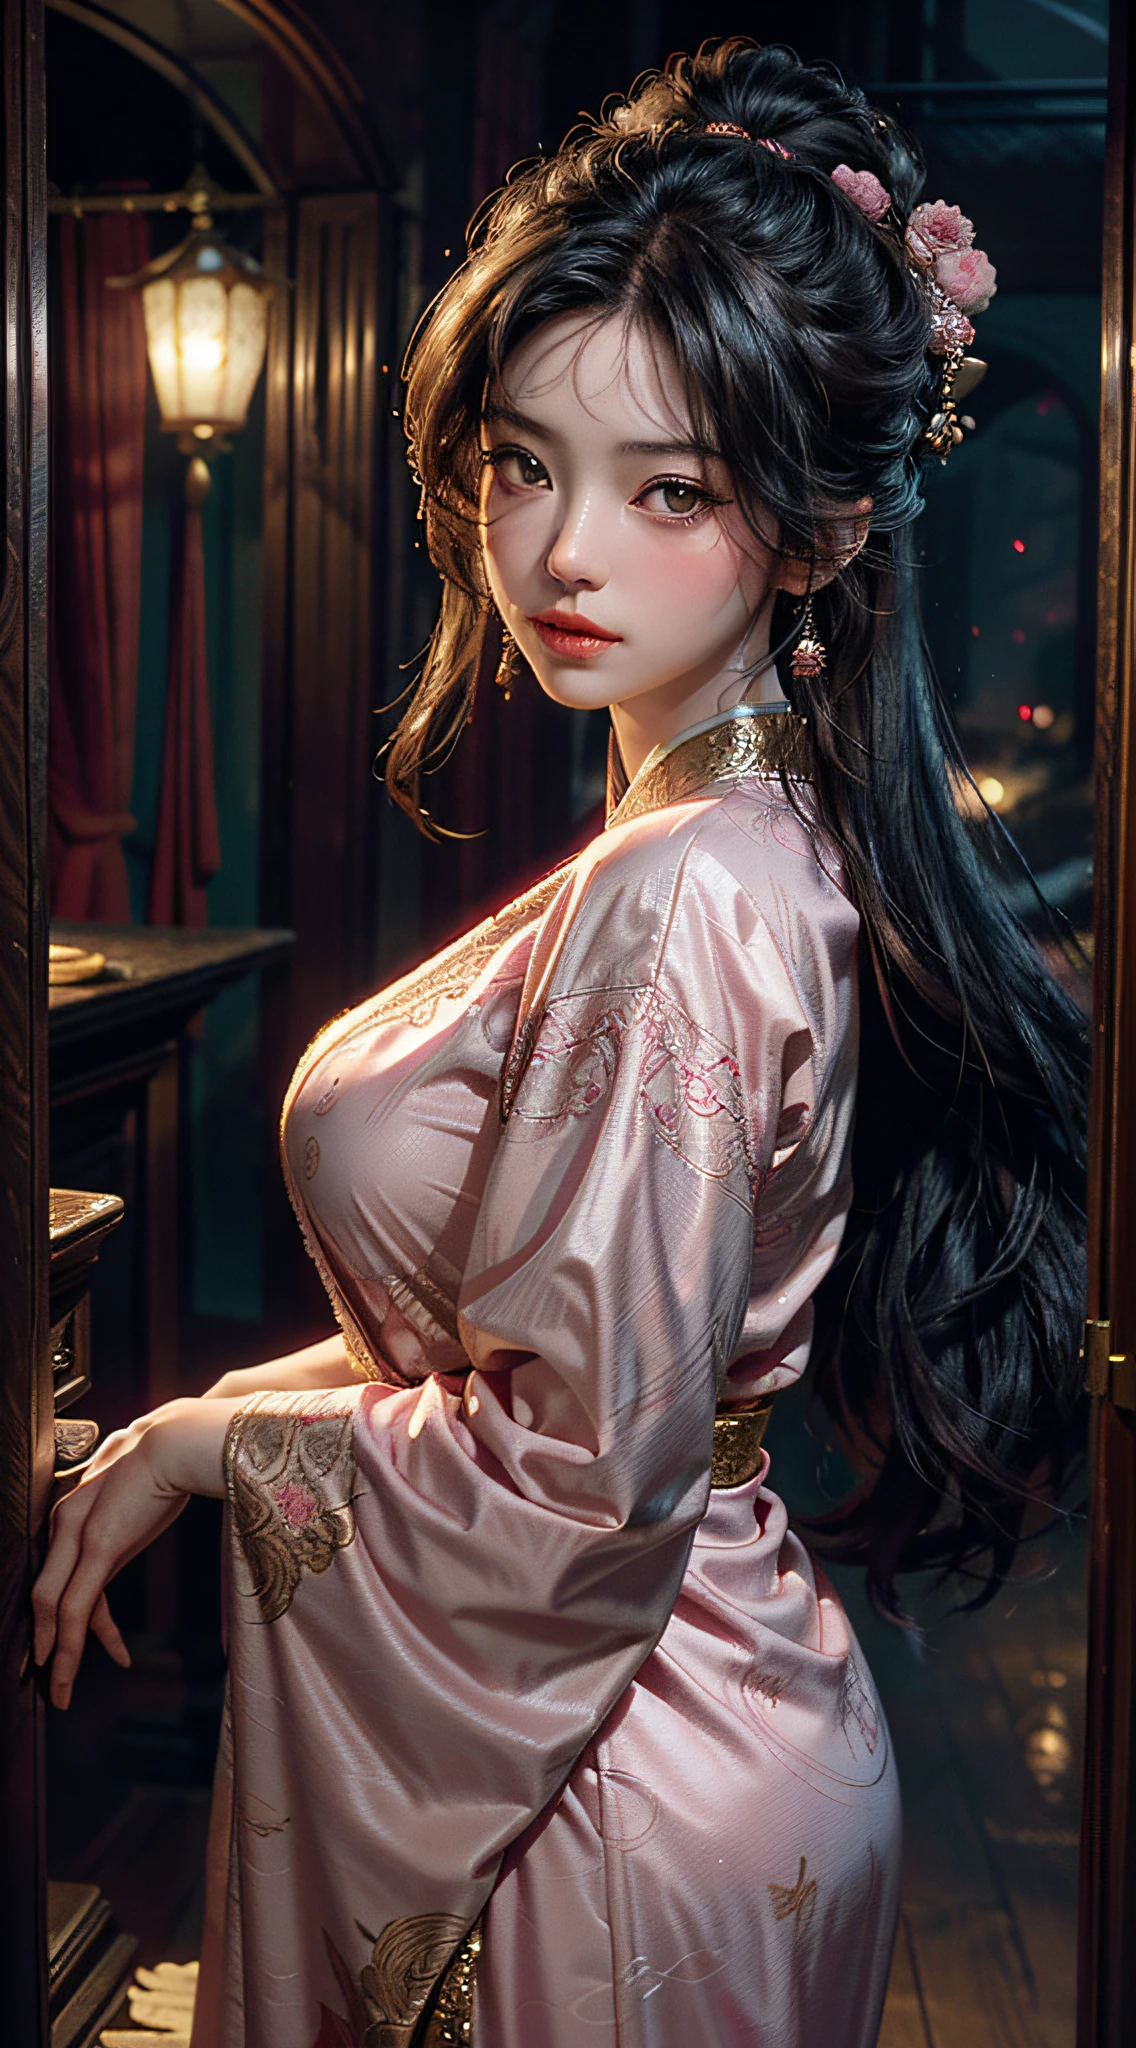 The art depicts a charming woman dressed in a flowing, silky traditional oriental dress, pink, decorated with intricate patterns and bright colors. Her dress drapes elegantly over her curvy figure, accentuating her seductive silhouette. She stood gracefully in the quiet moonlit night, bathed in the soft glow of the moonlight. The scene exudes an ethereal and dreamy atmosphere, with a touch of mystery and sexiness. The graphic style blends watercolor and digital illustration techniques to evoke a refined beauty and charm. The lights are filled with soft moonlight, casting soft highlights and shadows on her charming features.